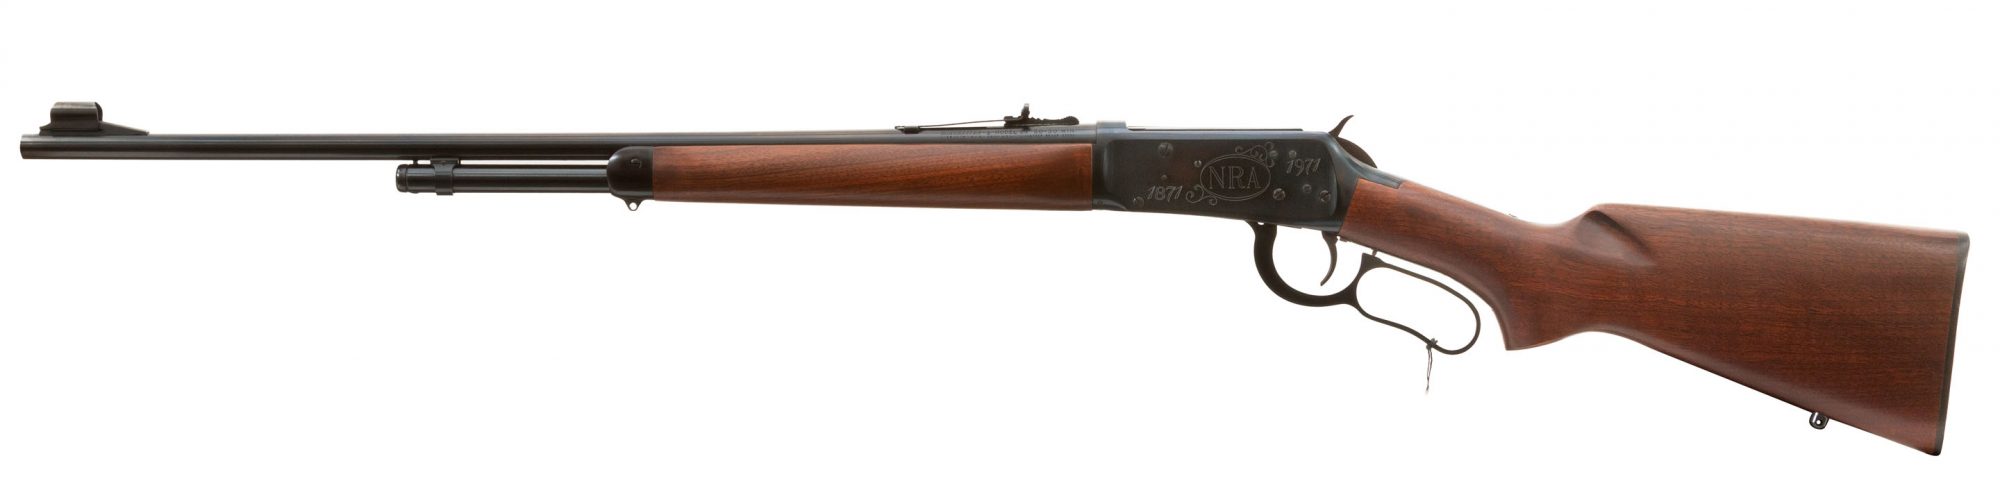 Photo of a Winchester Model 94 NRA Centennial Rifle, for sale by Turnbull Restoration of Bloomfield, NY